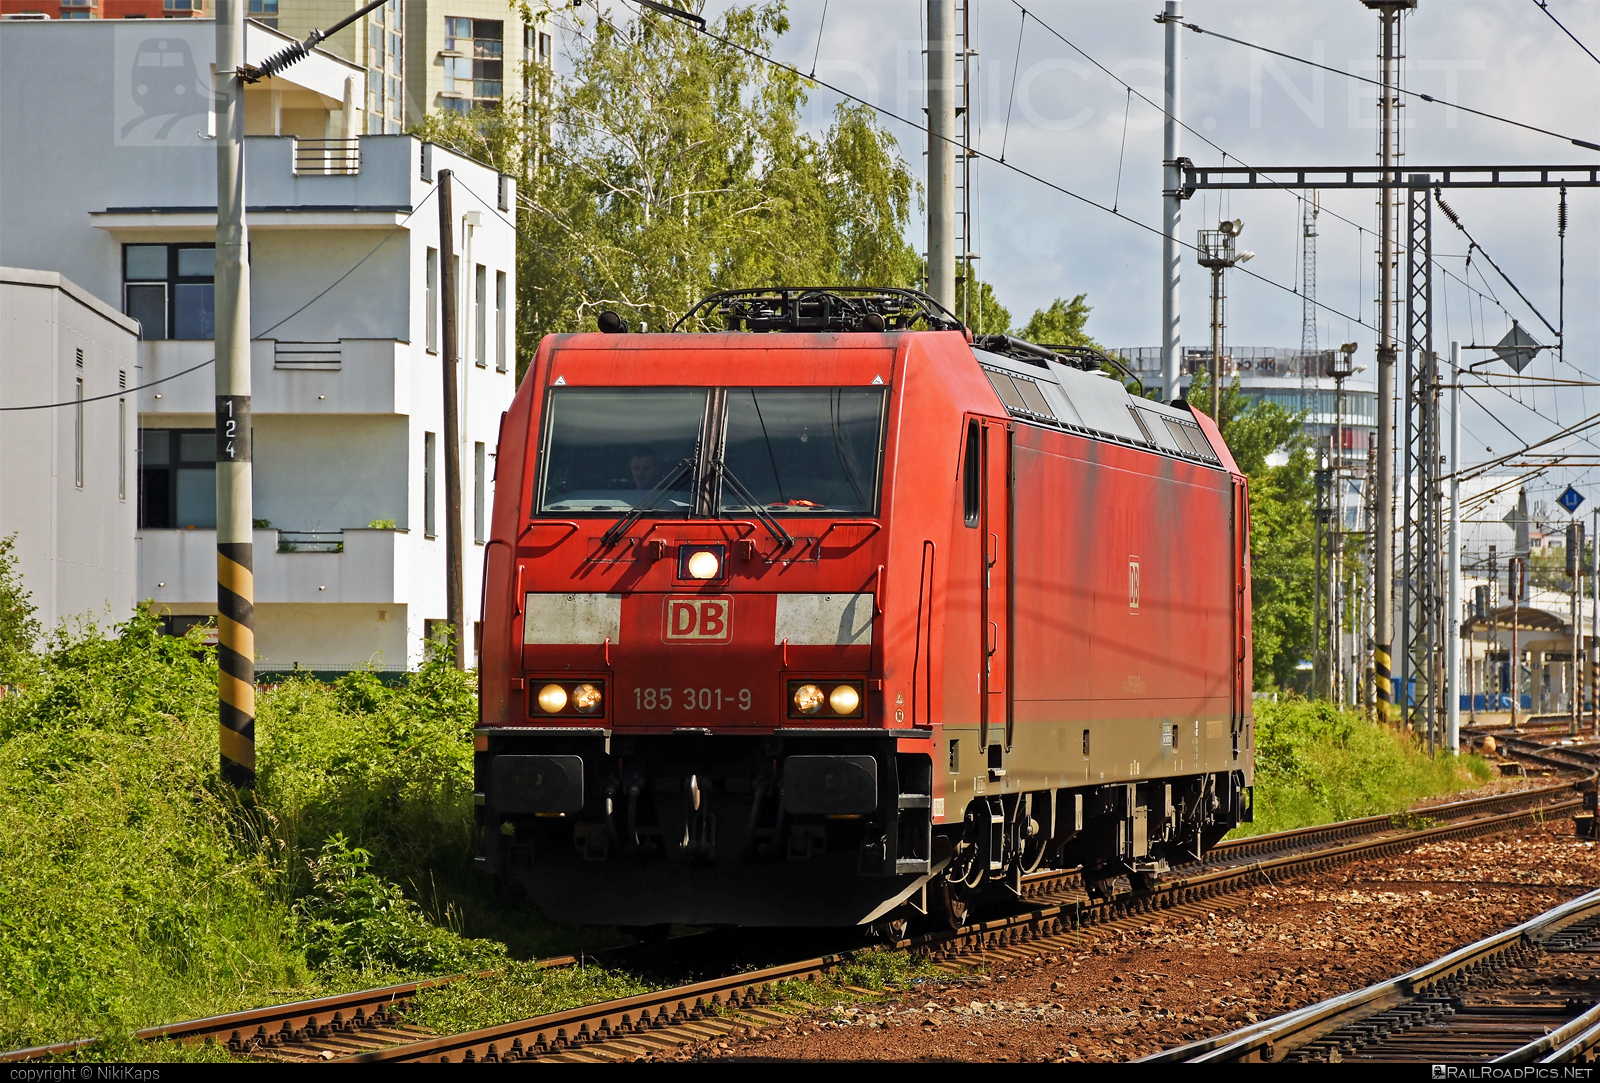 Bombardier TRAXX F140 AC2 - 185 301-9 operated by DB Cargo AG #bombardier #bombardiertraxx #db #dbcargo #dbcargoag #deutschebahn #traxx #traxxf140 #traxxf140ac #traxxf140ac2